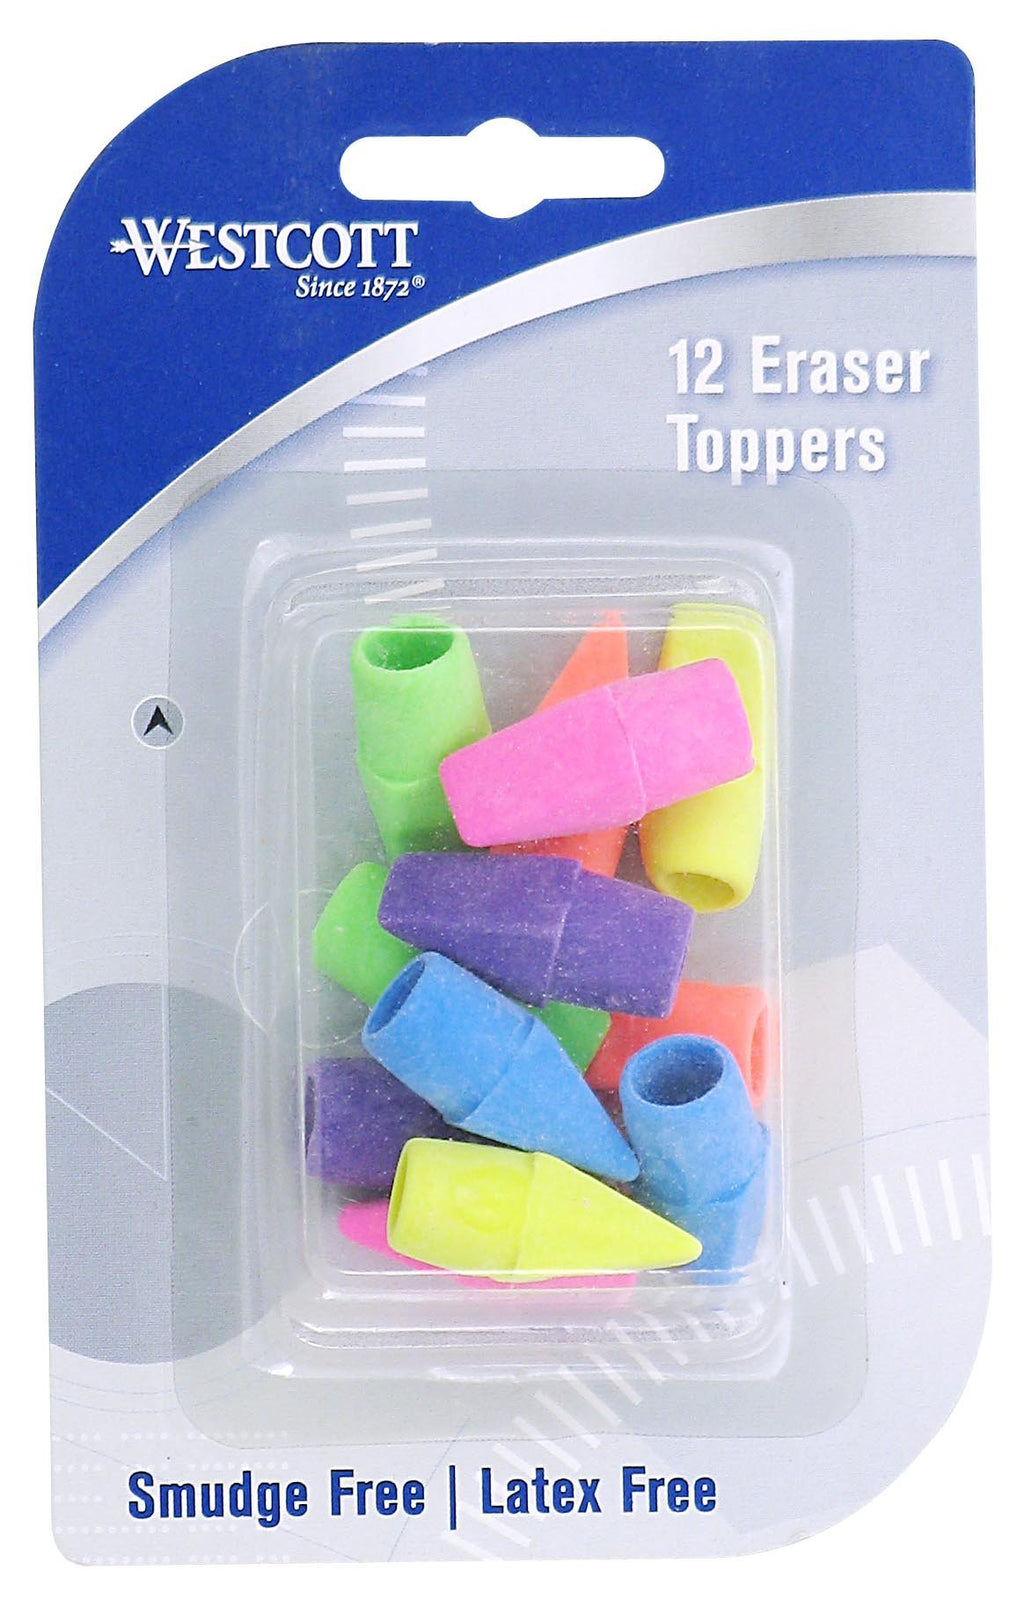 Westcott Eraser Toppers, 12 per Pack, Assorted Colors